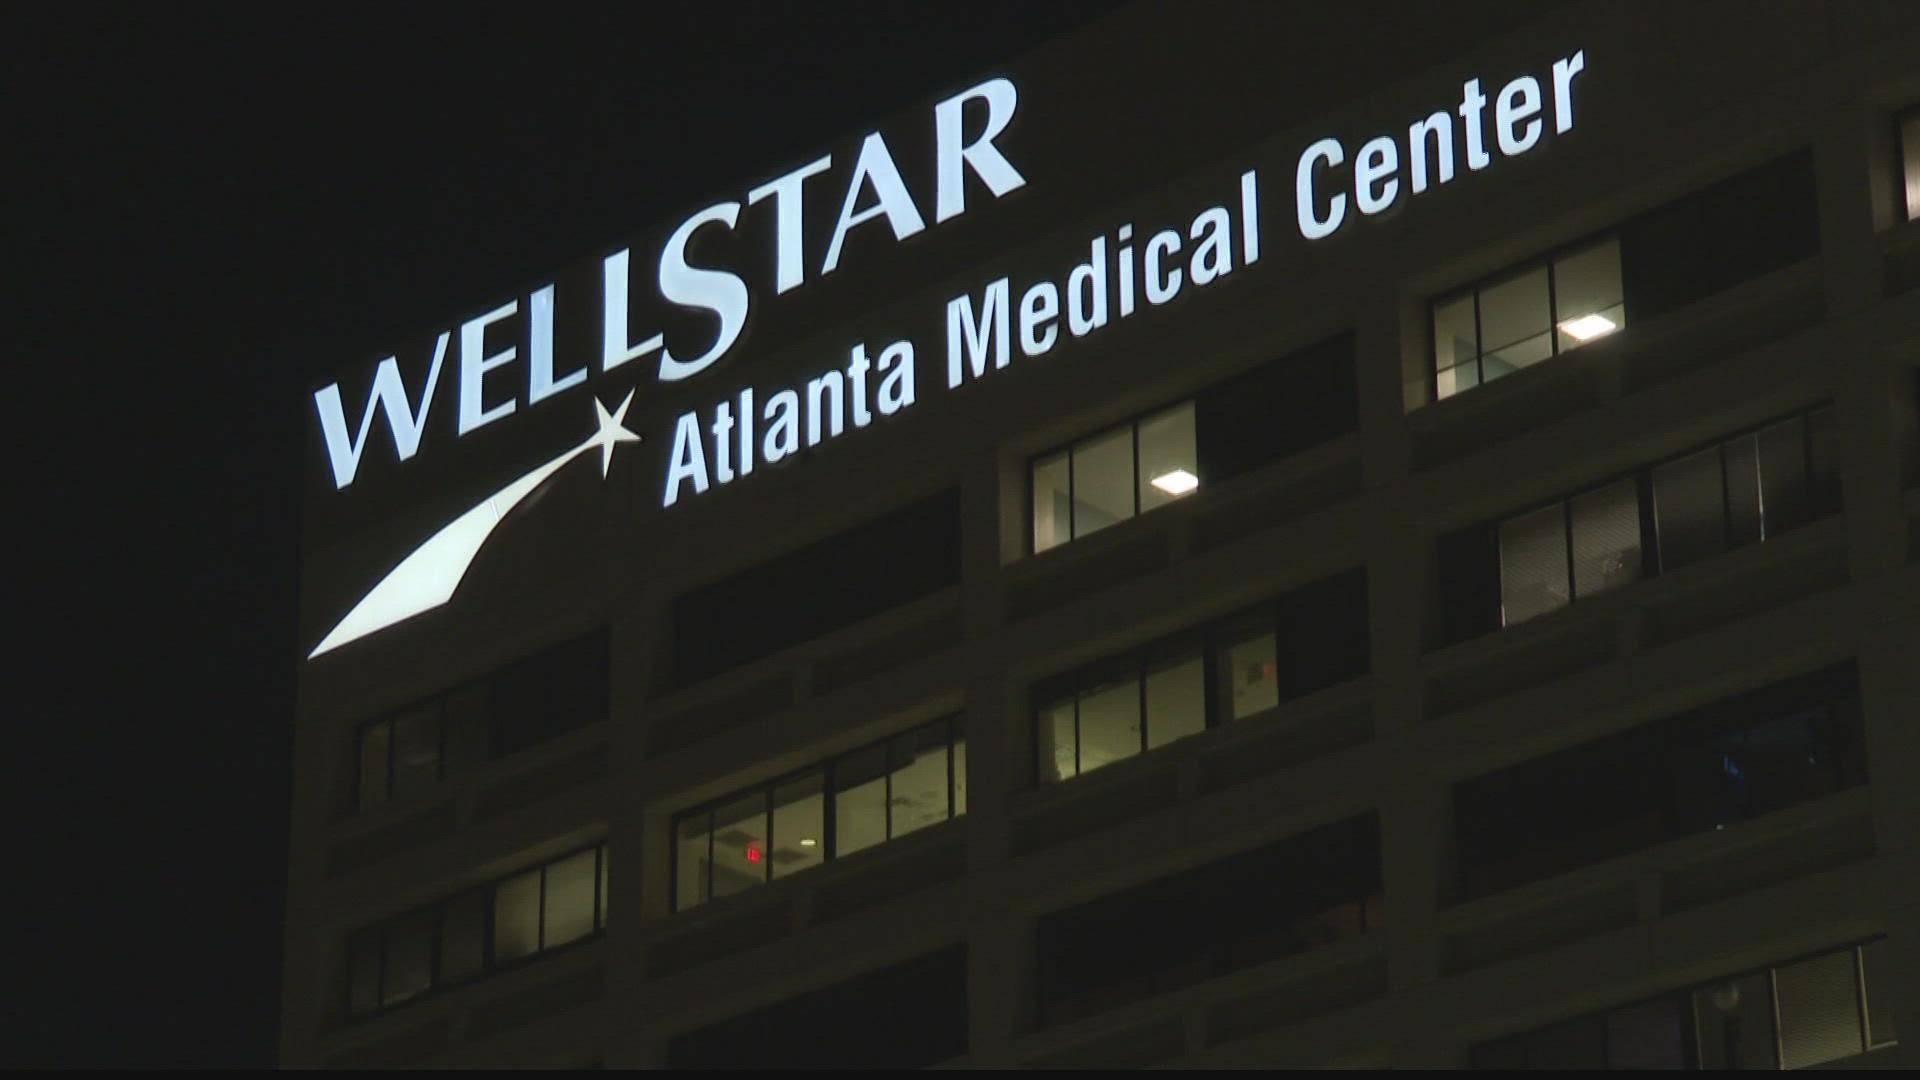 Wellstar Health System announced it plans to cease operations at Atlanta Medical Center in November.